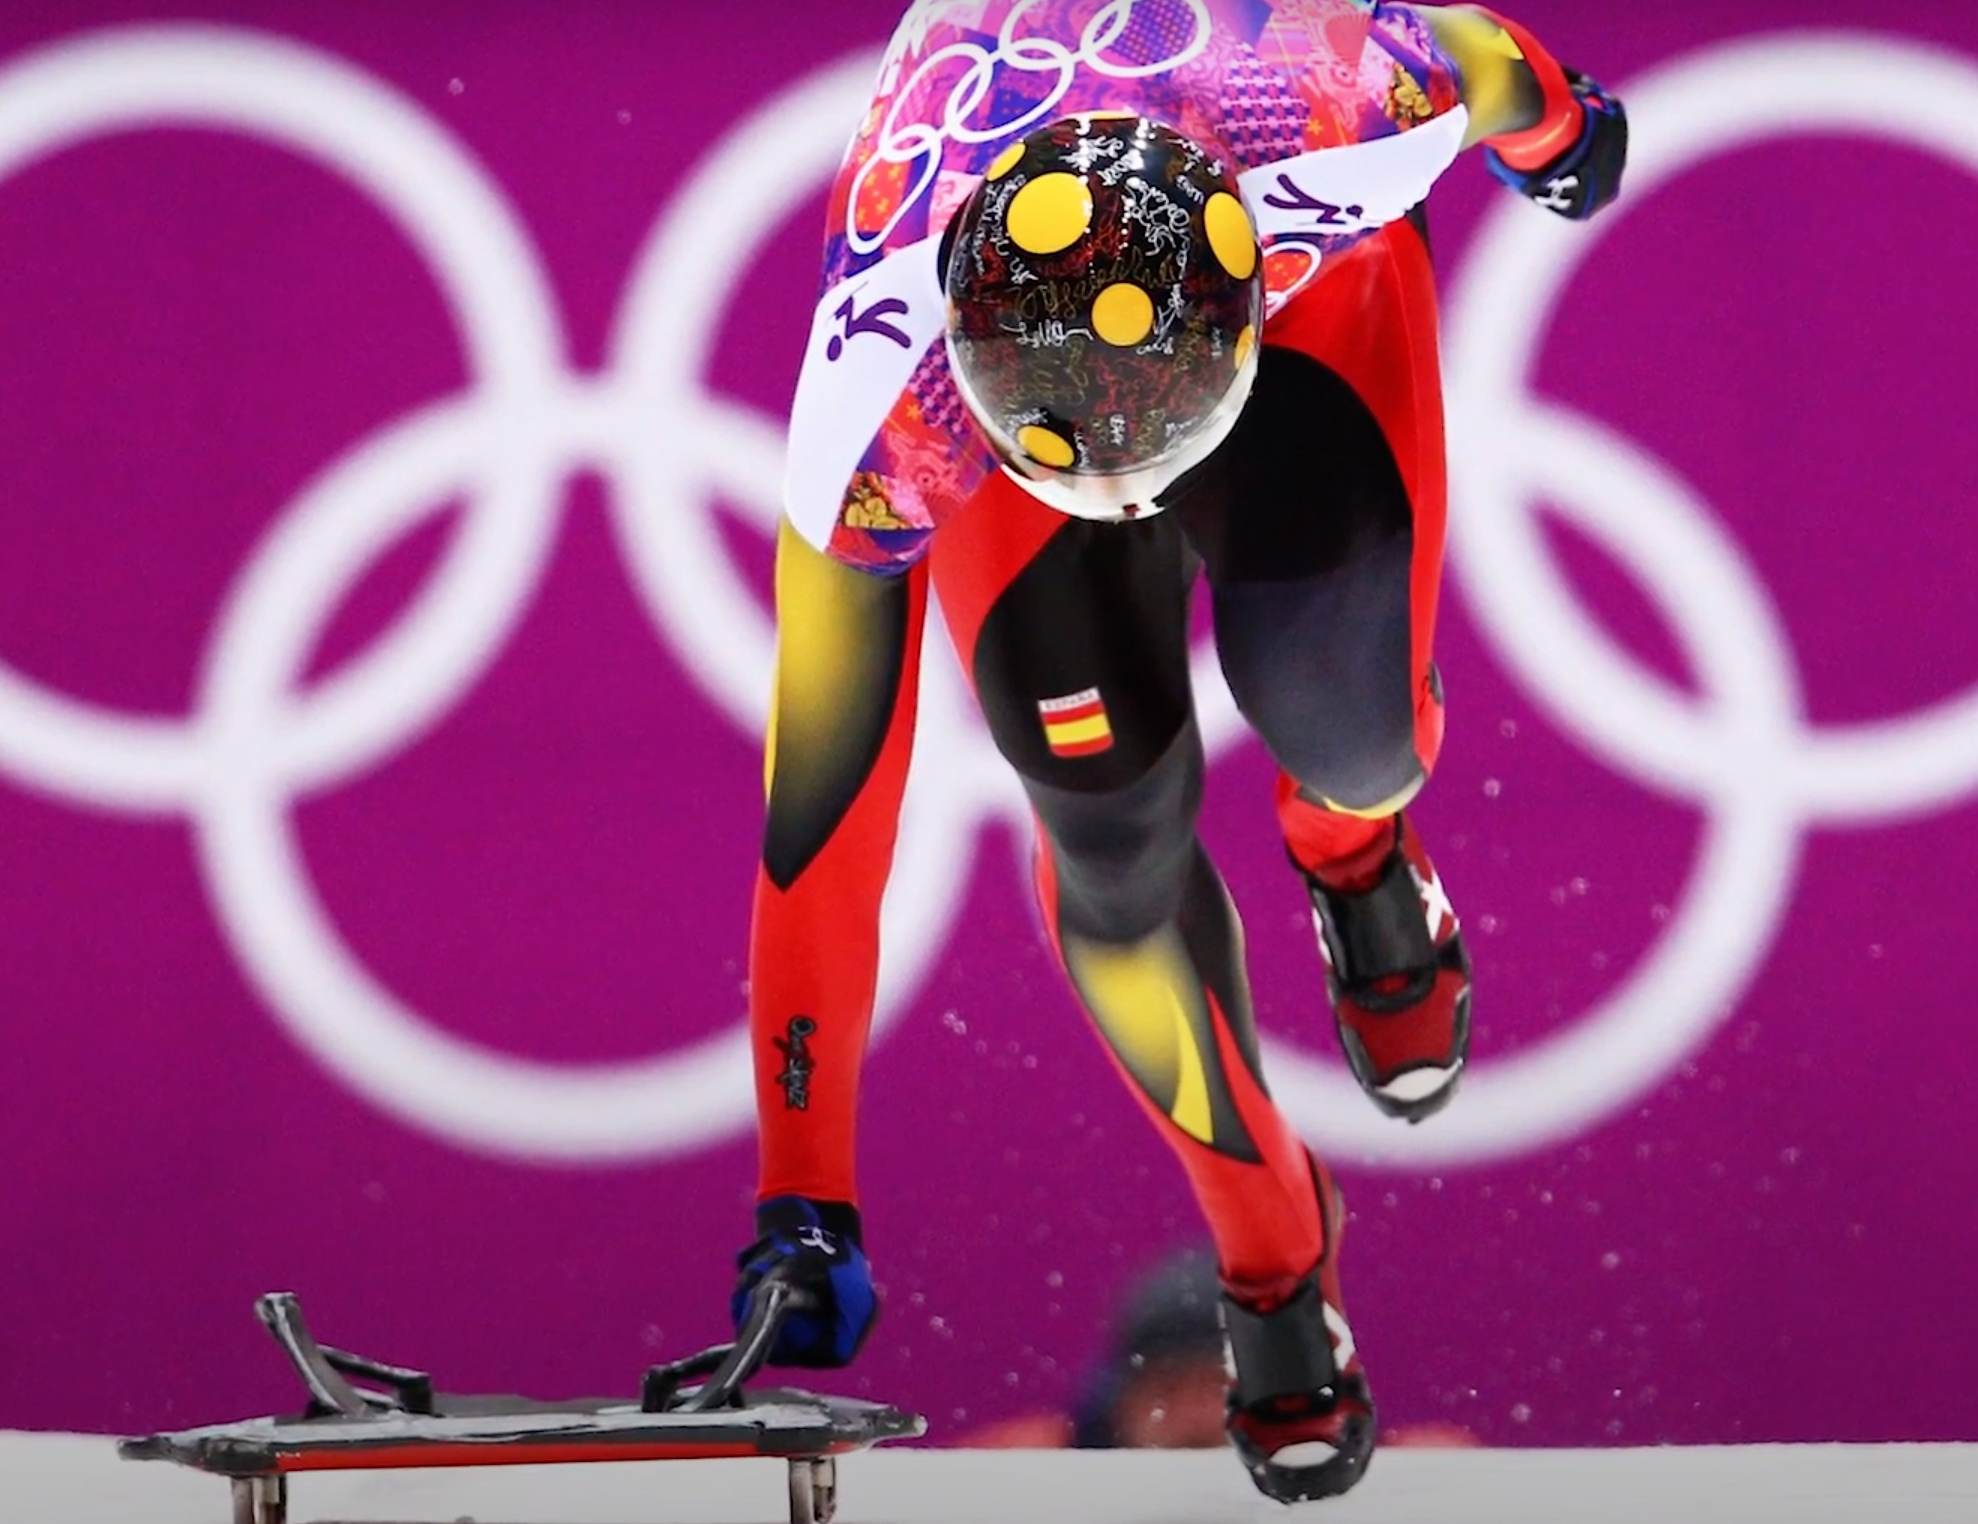 Sledding: Skeleton in the Olympics, Riding Down a Frozen Track, Spanish Athlete, Olympics Luger. 1980x1530 HD Wallpaper.